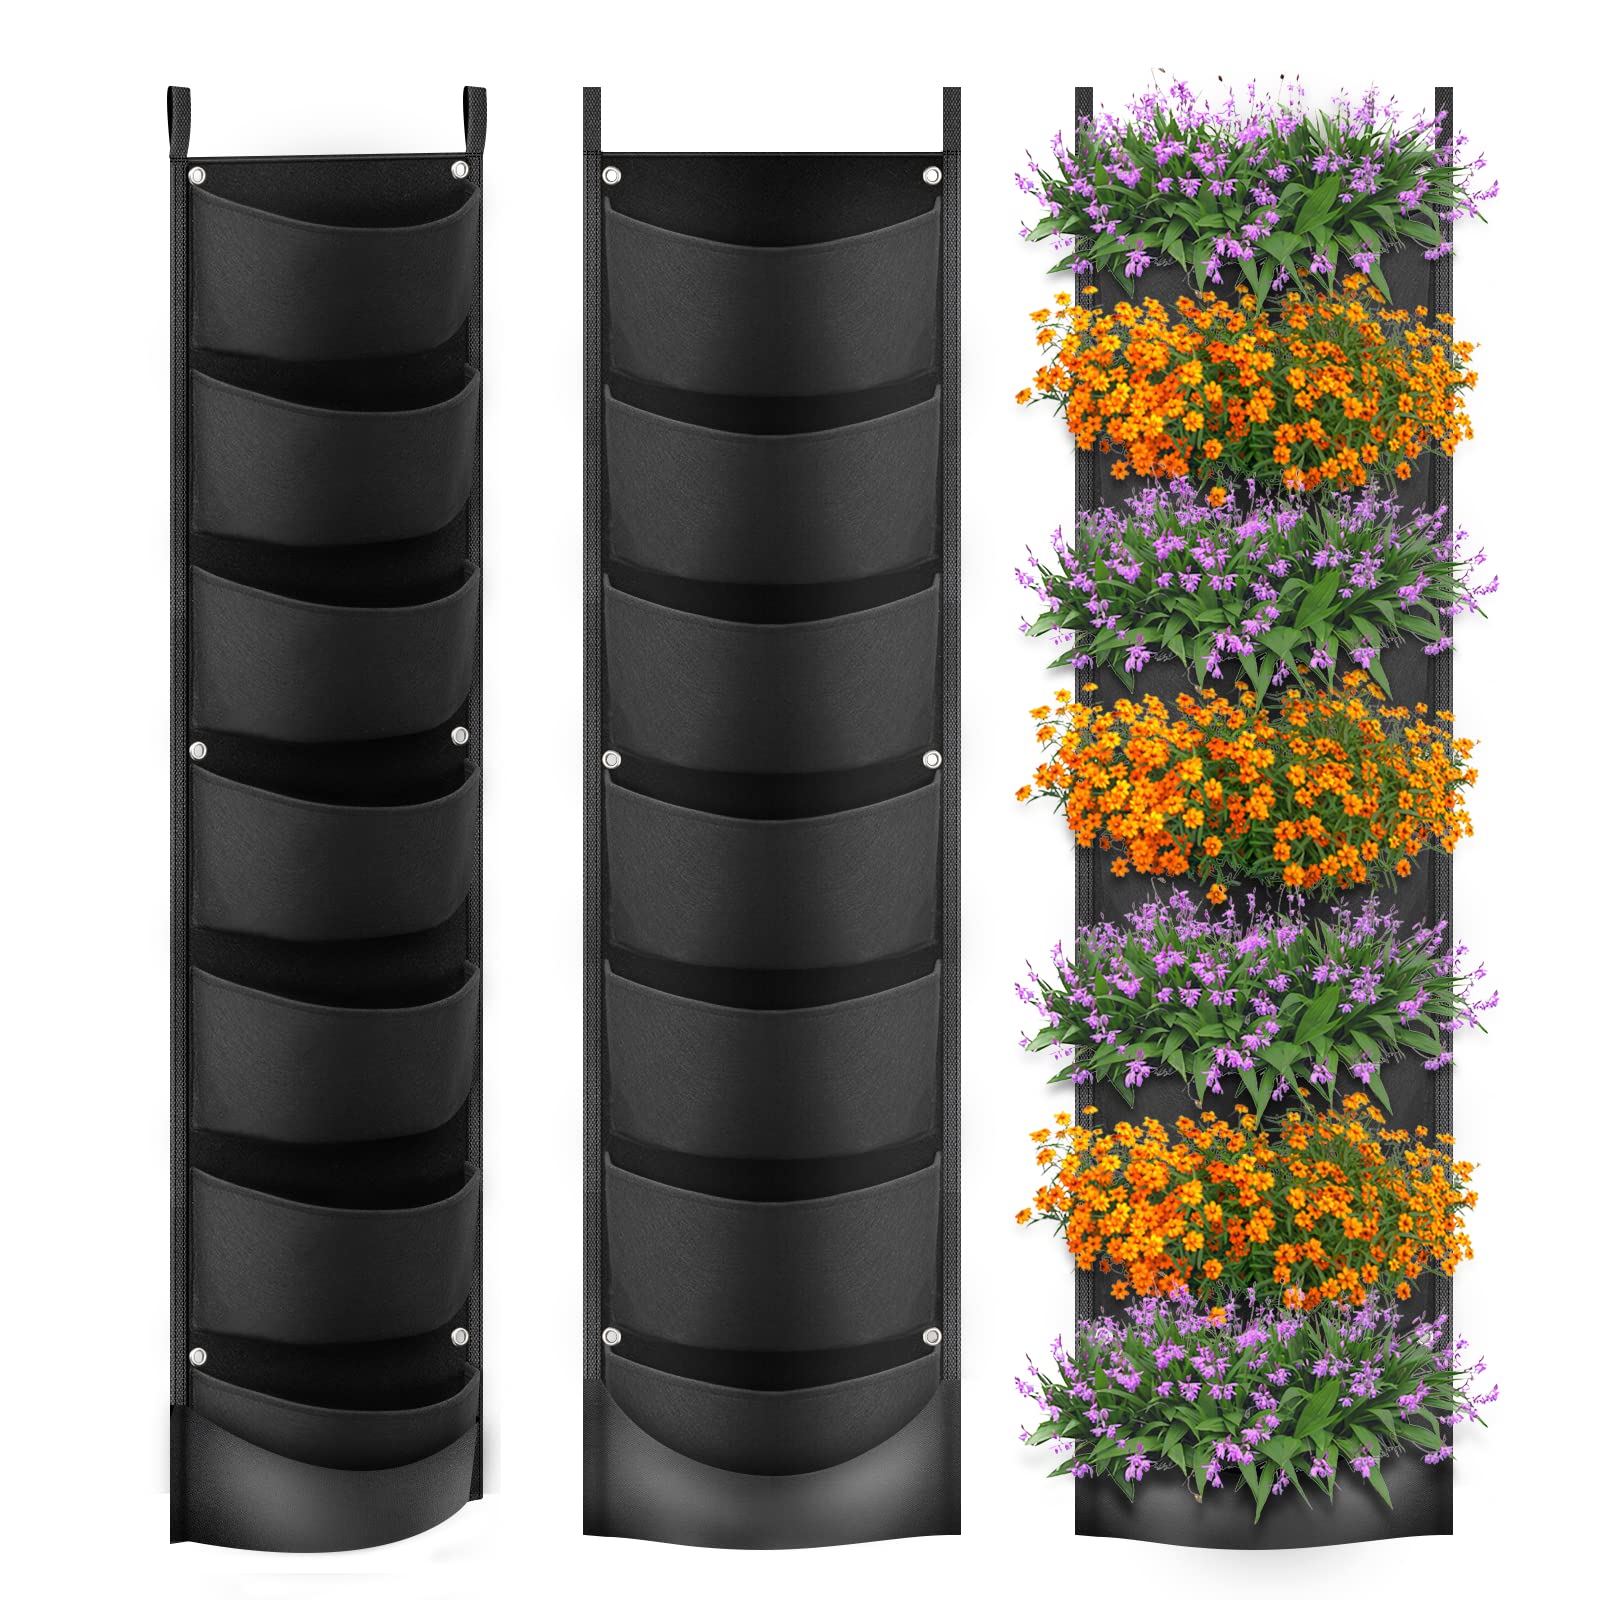 iPower Hanging Vertical Wall Planter